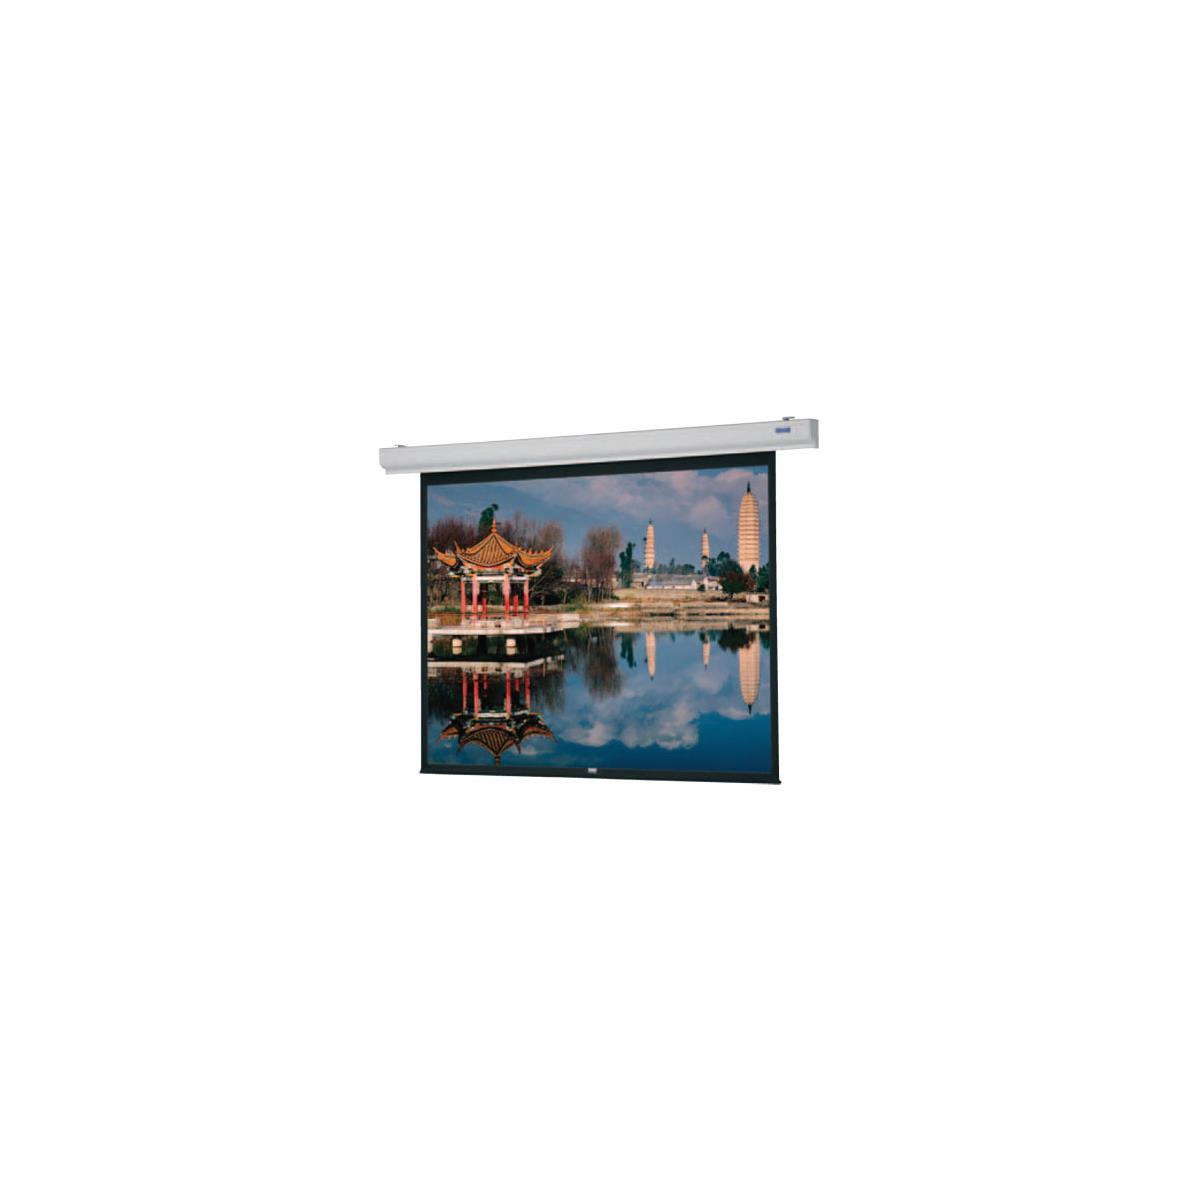 Da-Lite Designer  Electrol Video Format Electric Wall and Ceiling Projection Screen, 43x57", Matte White Surface -  89734